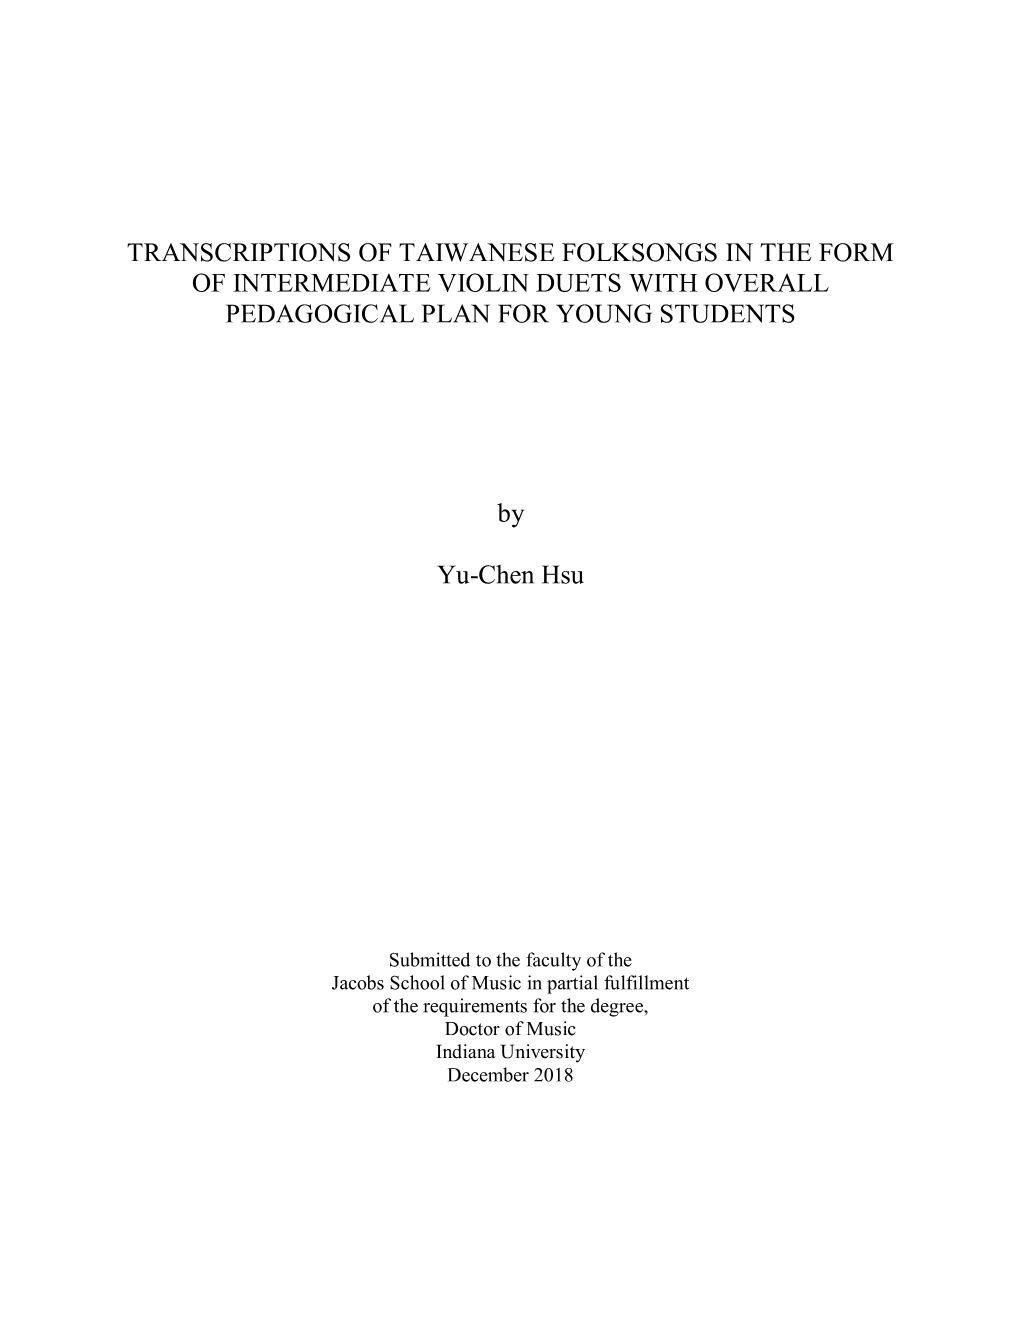 Transcriptions of Taiwanese Folksongs in the Form of Intermediate Violin Duets with Overall Pedagogical Plan for Young Students